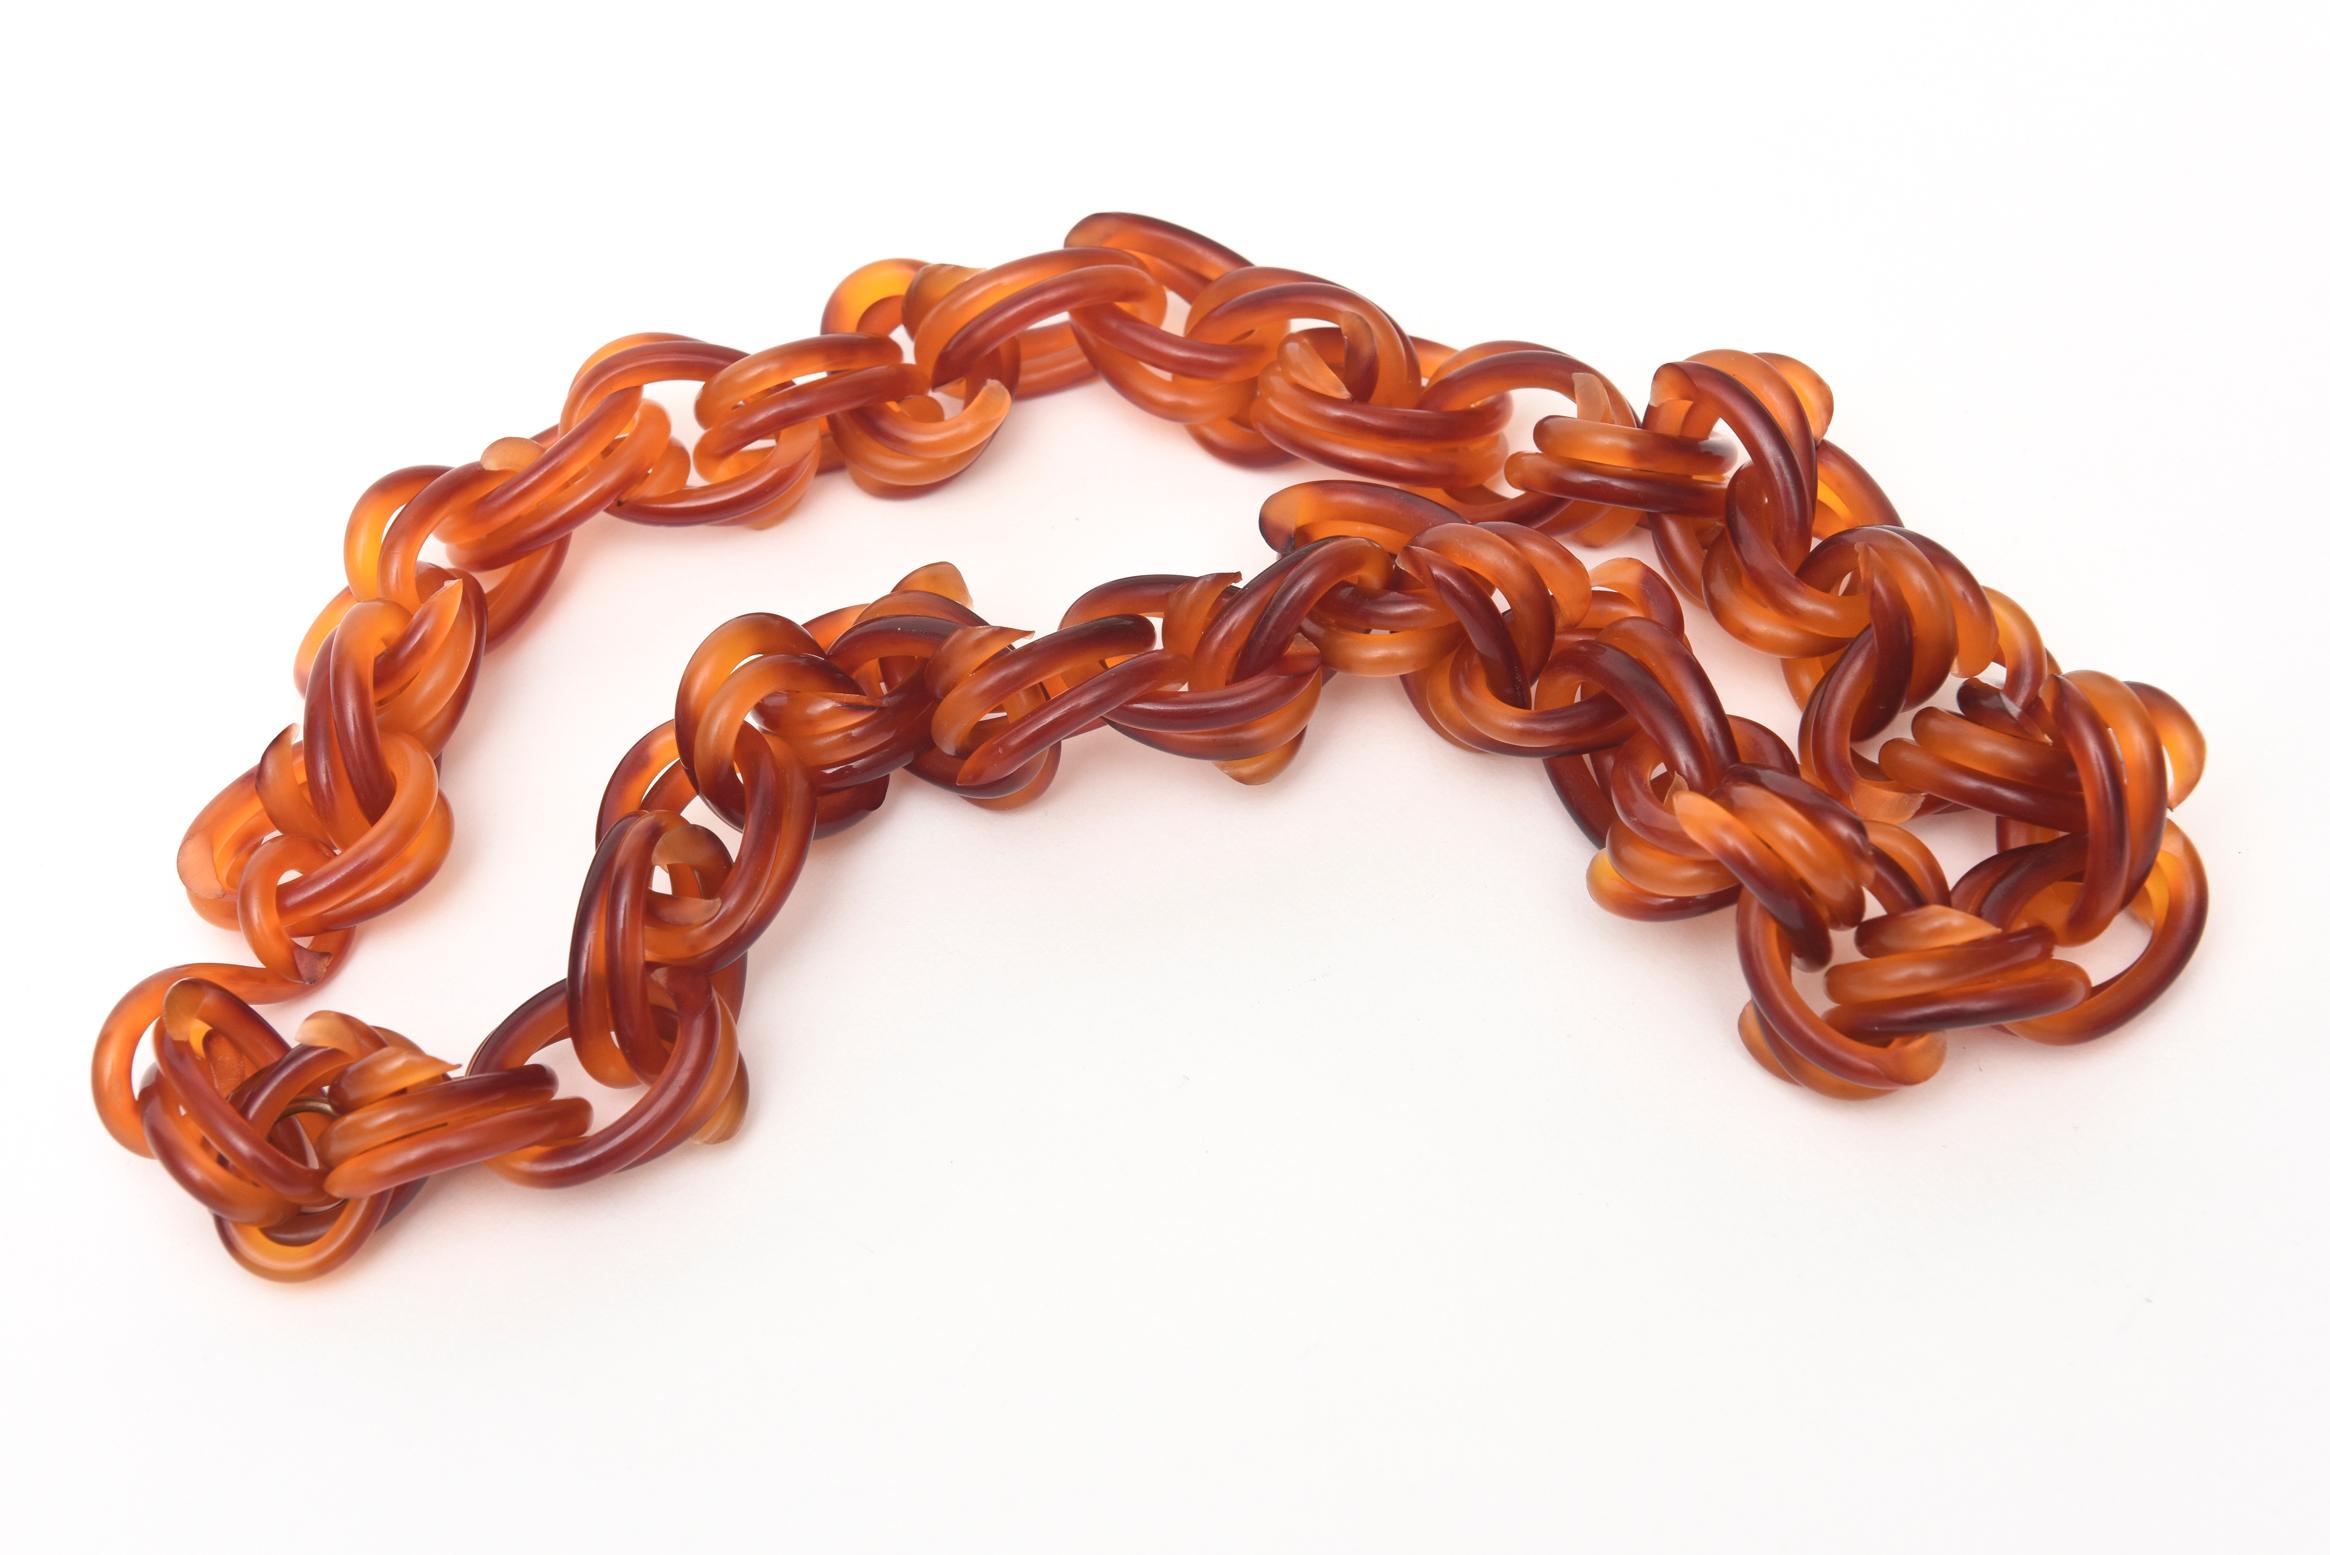 This lovely twisted lucite amber brown toned lucite link necklace is perfect for 2020. It is from the 70's. This looks so chic with white!